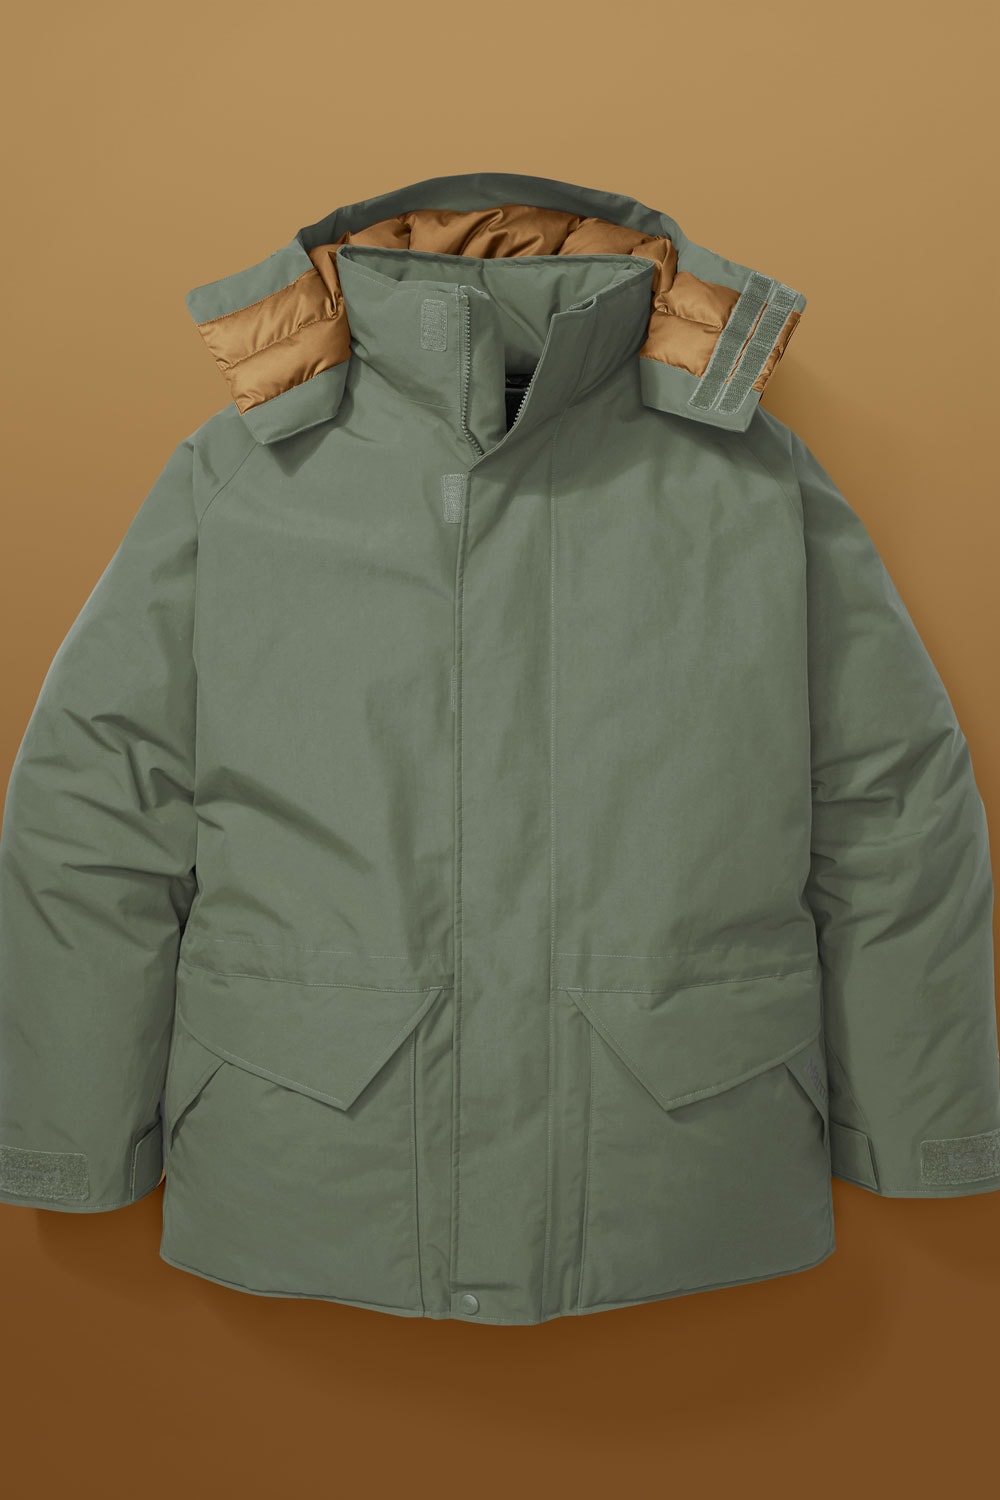 Marmot Mammoth Parka Review: The Perfect Chic, Cozy, Unisex Coat